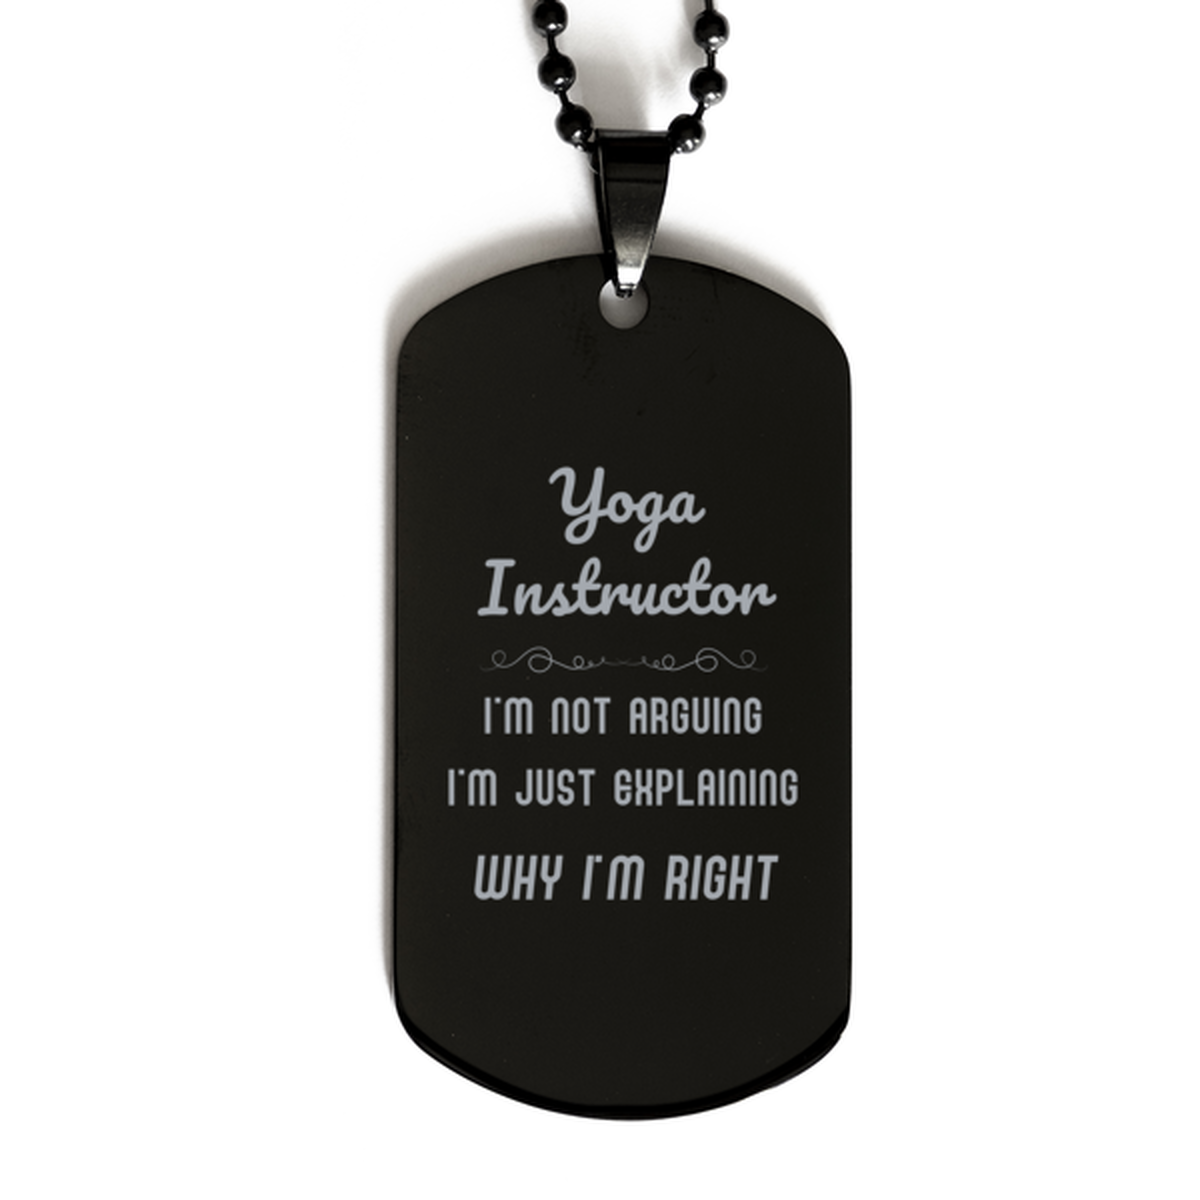 Yoga Instructor I'm not Arguing. I'm Just Explaining Why I'm RIGHT Black Dog Tag, Funny Saying Quote Yoga Instructor Gifts For Yoga Instructor Graduation Birthday Christmas Gifts for Men Women Coworker